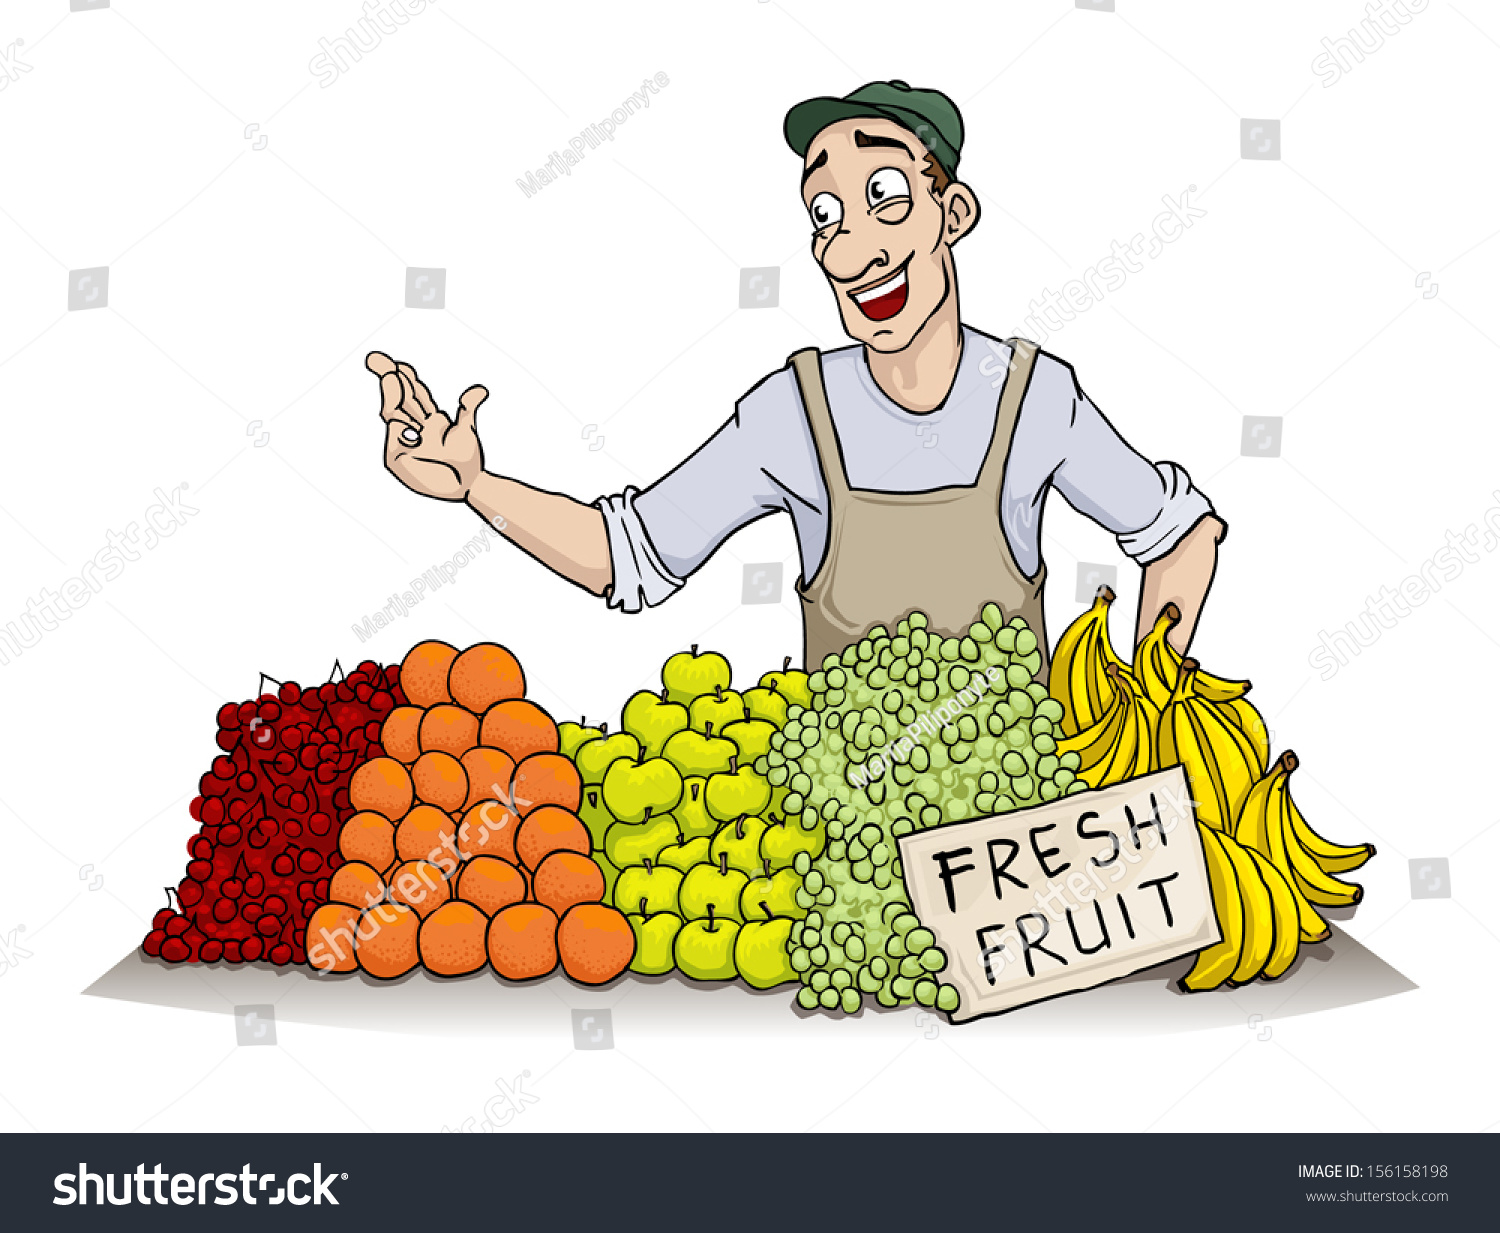 greengrocer clipart - photo #29